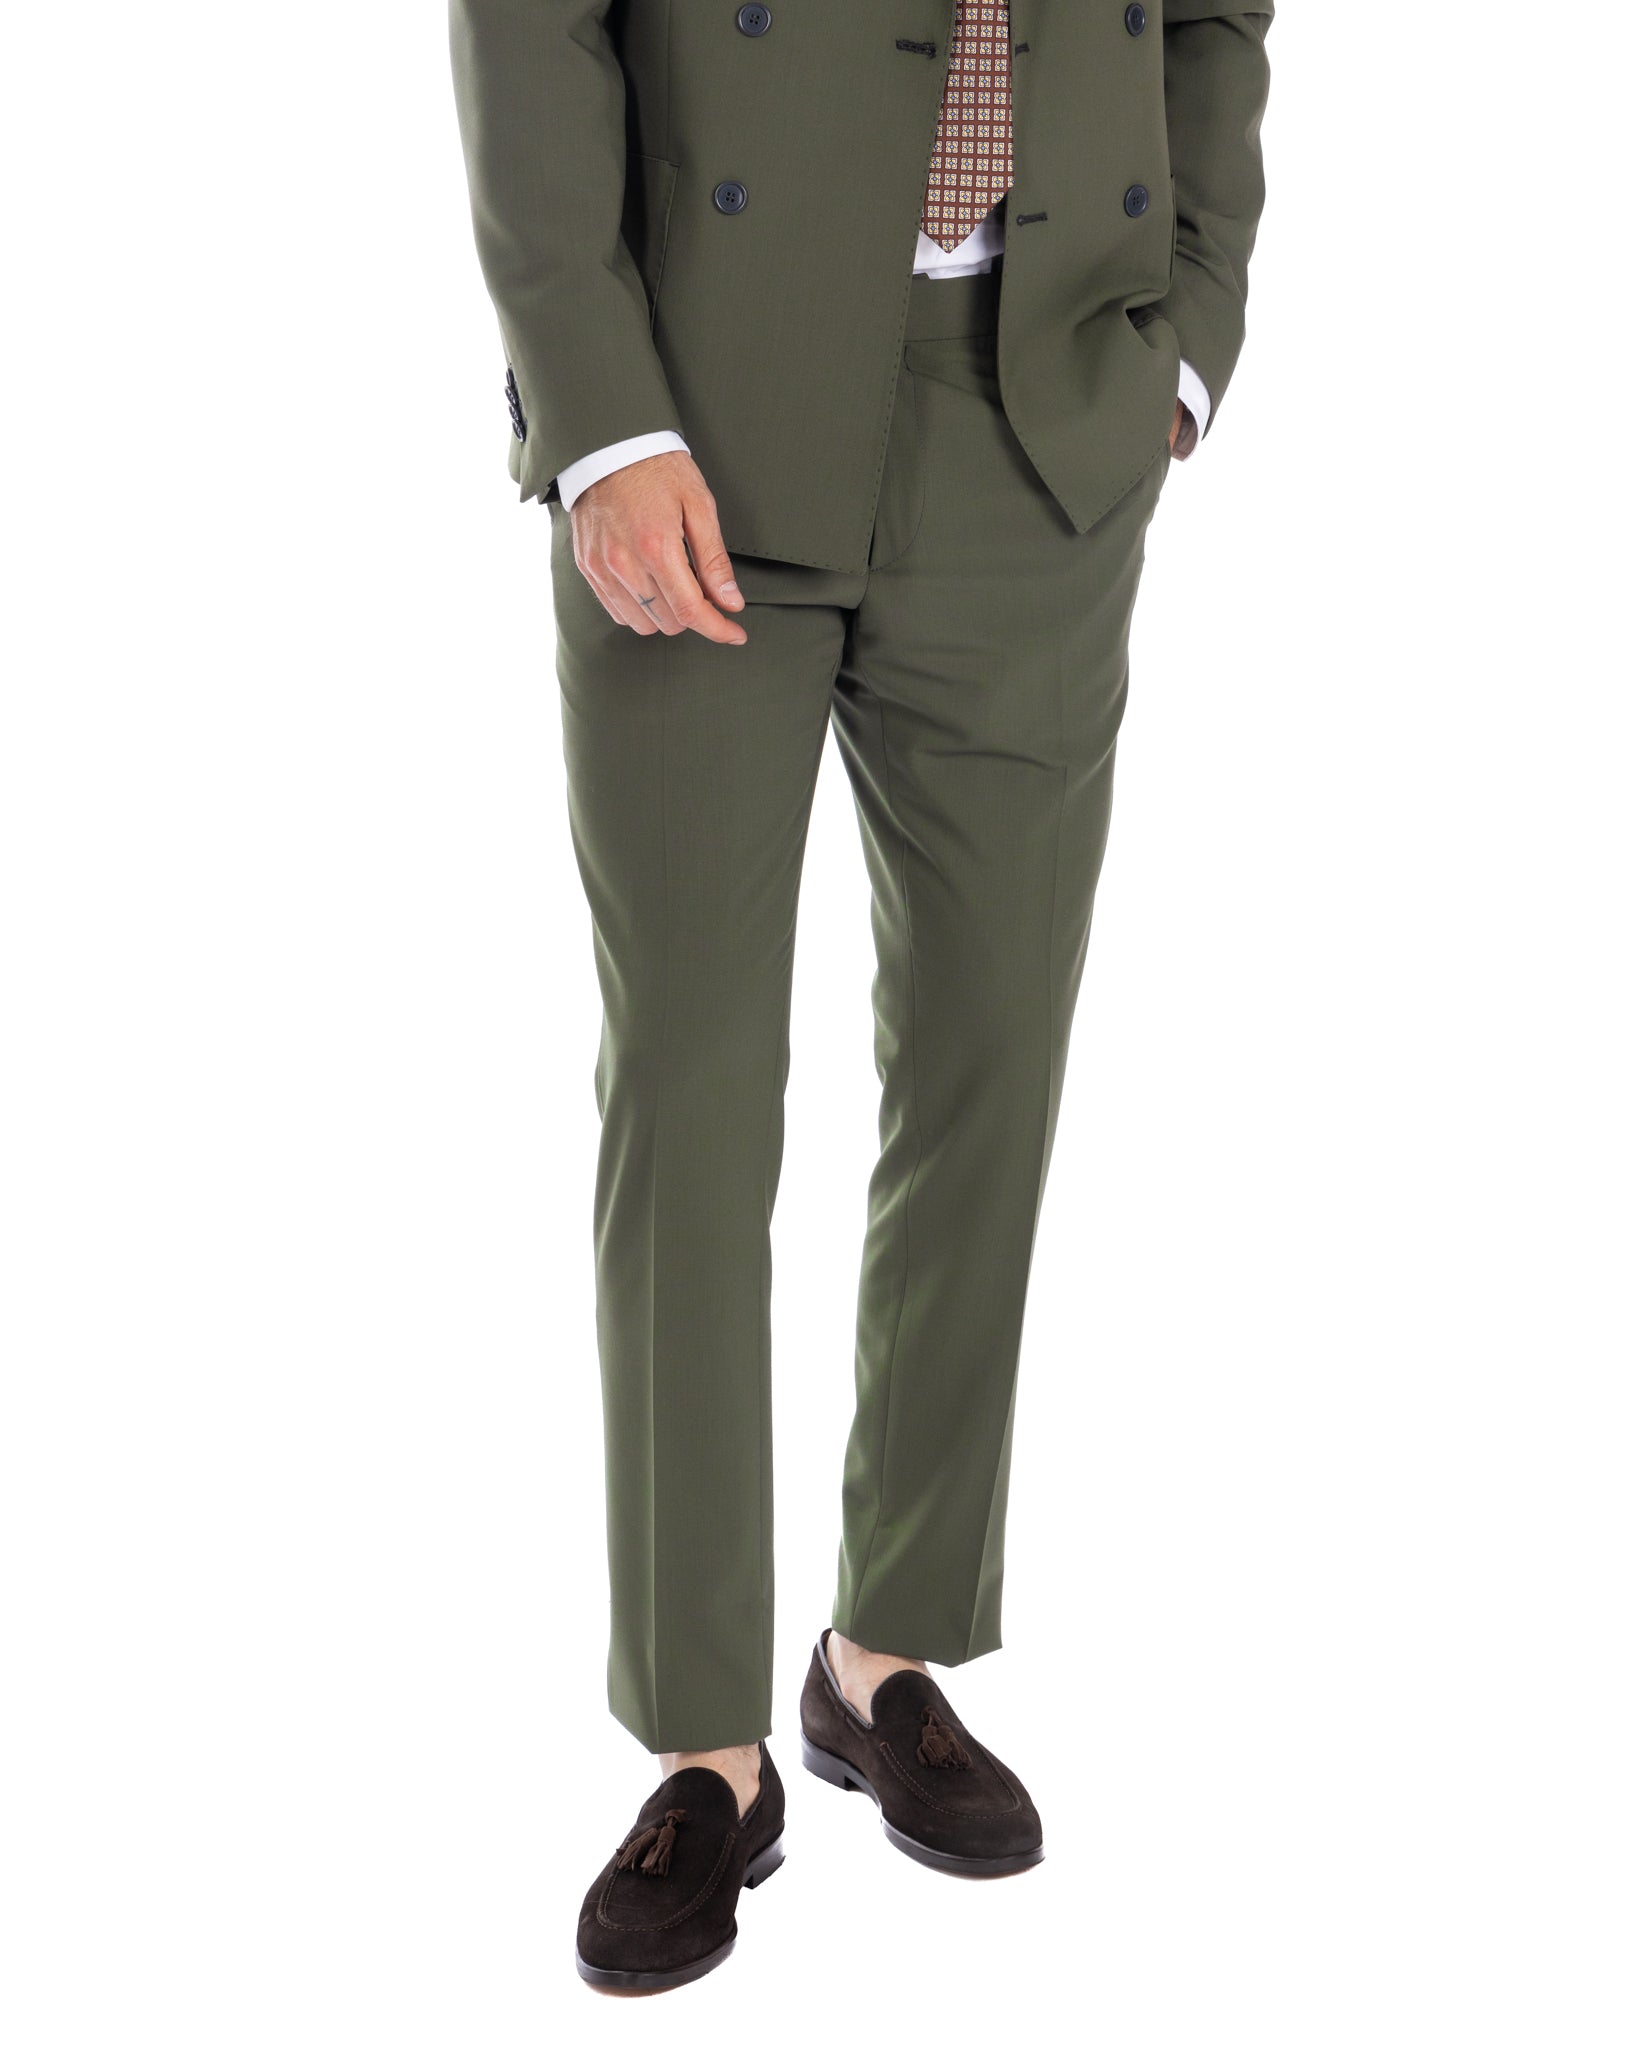 Monaco - military double-breasted suit